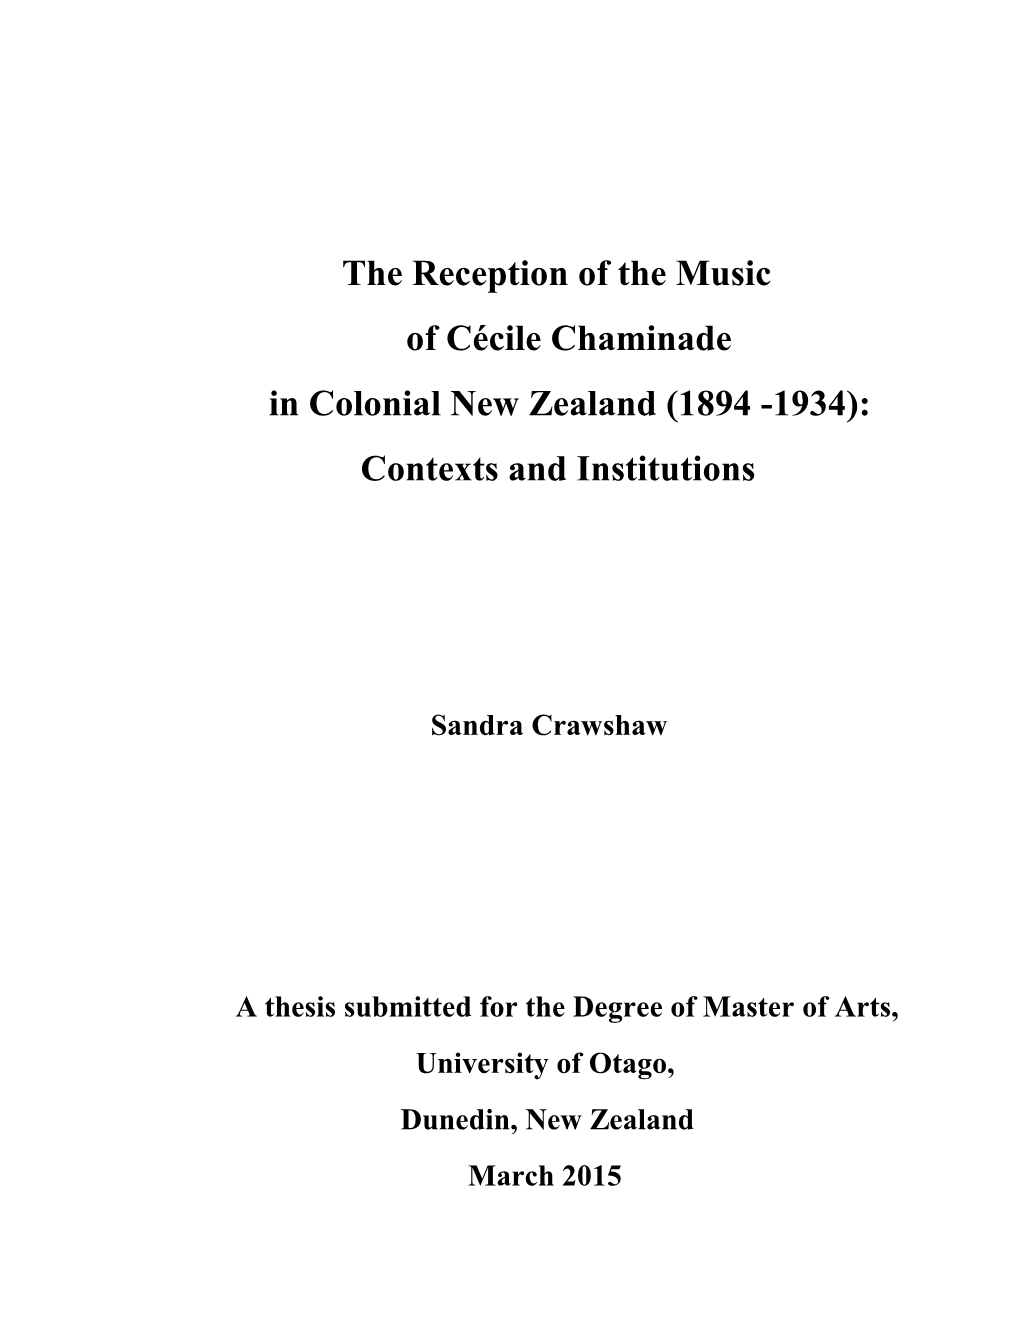 The Reception of the Music of Cécile Chaminade in Colonial New Zealand (1894 -1934): Contexts and Institutions